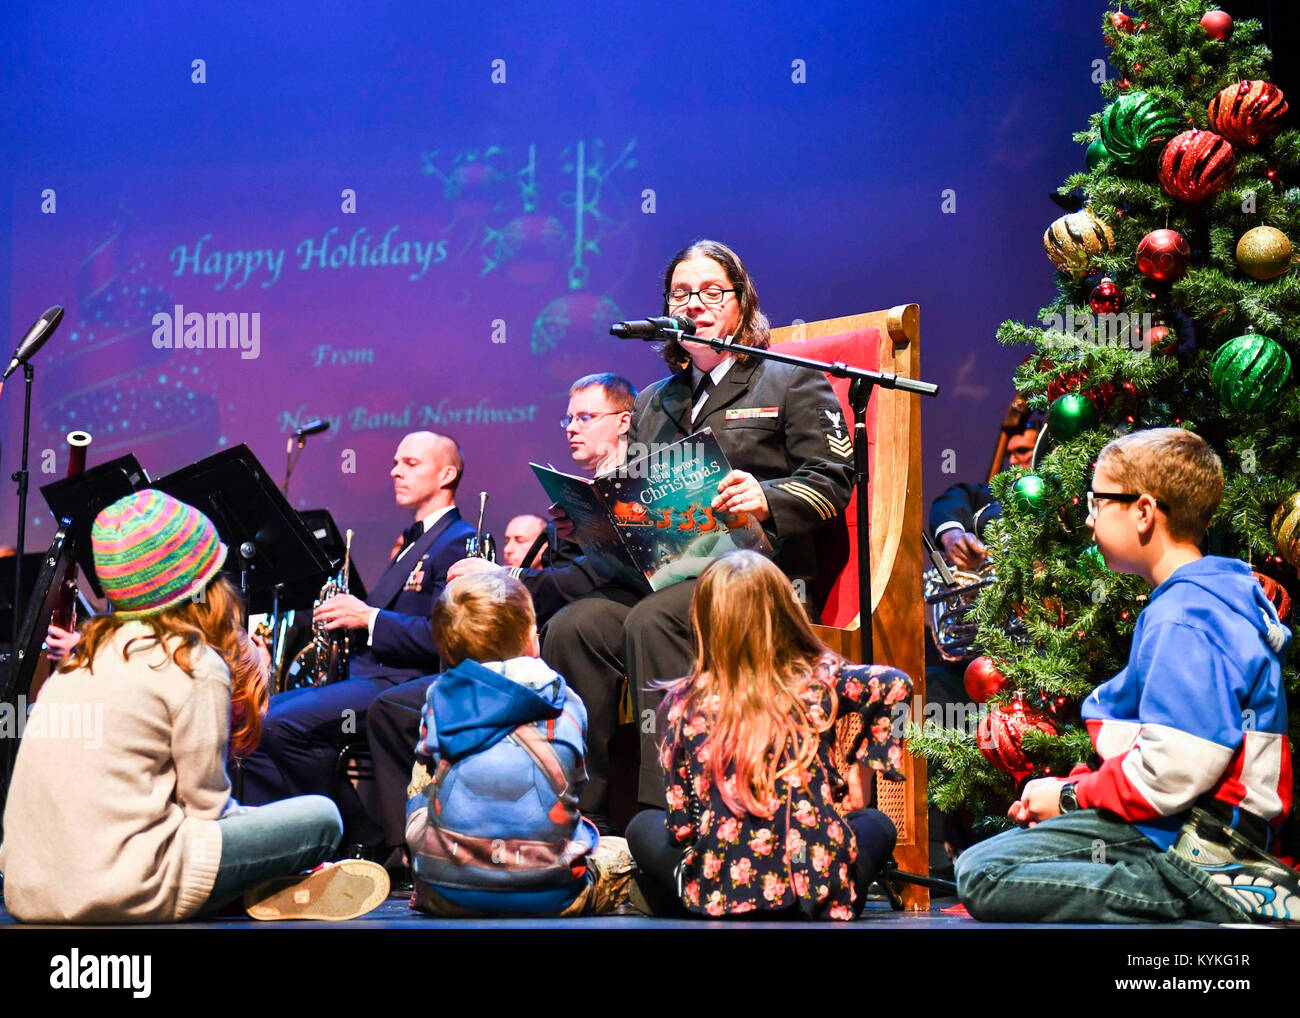 EVERETT, Wash. (Dec. 11, 2017) Musician 1st Class Jennifer Gions, reads to children during a performance featuring Navy Band Northwest and U.S. Air Force Band of the Golden West during the Season's Greetings holiday concert at the Everett Performing Arts Center. Navy Band Northwest is one of eleven official U.S. Navy Bands located around the world. (U.S. Navy photo by Mass Communication Specialist 2nd Class Joseph Montemarano/Released)171211-N-WX604-0388 Stock Photo